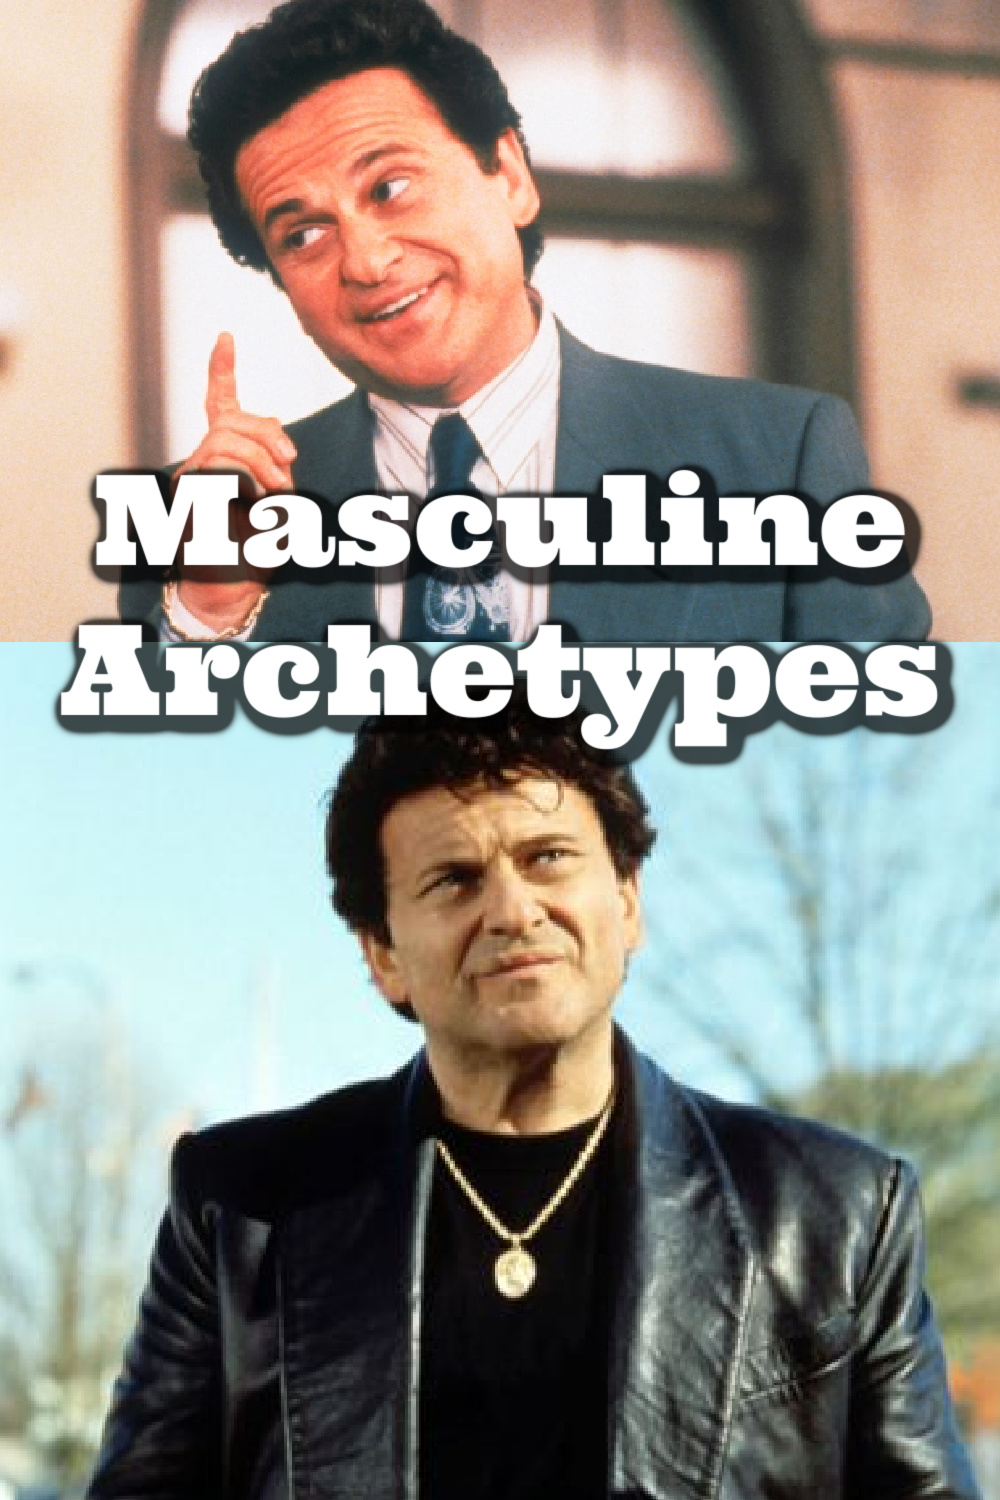 4 masculine archetypes, archetypes of masculinity, 4 archetypes of masculinity, my cousin vinny, the four archetypes of the mature masculine, king warrior magician lover, the king archetype, king energy archetype, divine masculine archetypes, understanding masculine and feminine energy, understanding masculine and feminine energy beginners guide, feminine and masculine energy in relationships, difference between feminine and masculine energy, divine masculine and feminine healing energy, feminine energy, feminine and masculine energy balance, feminine and masculine energy traits, feminine masculine energy, feminine energy vs masculine energy, masculine energy, masculine energy vs feminine energy, masculine vs feminine, Everyday Starlet, Sarah Blodgett